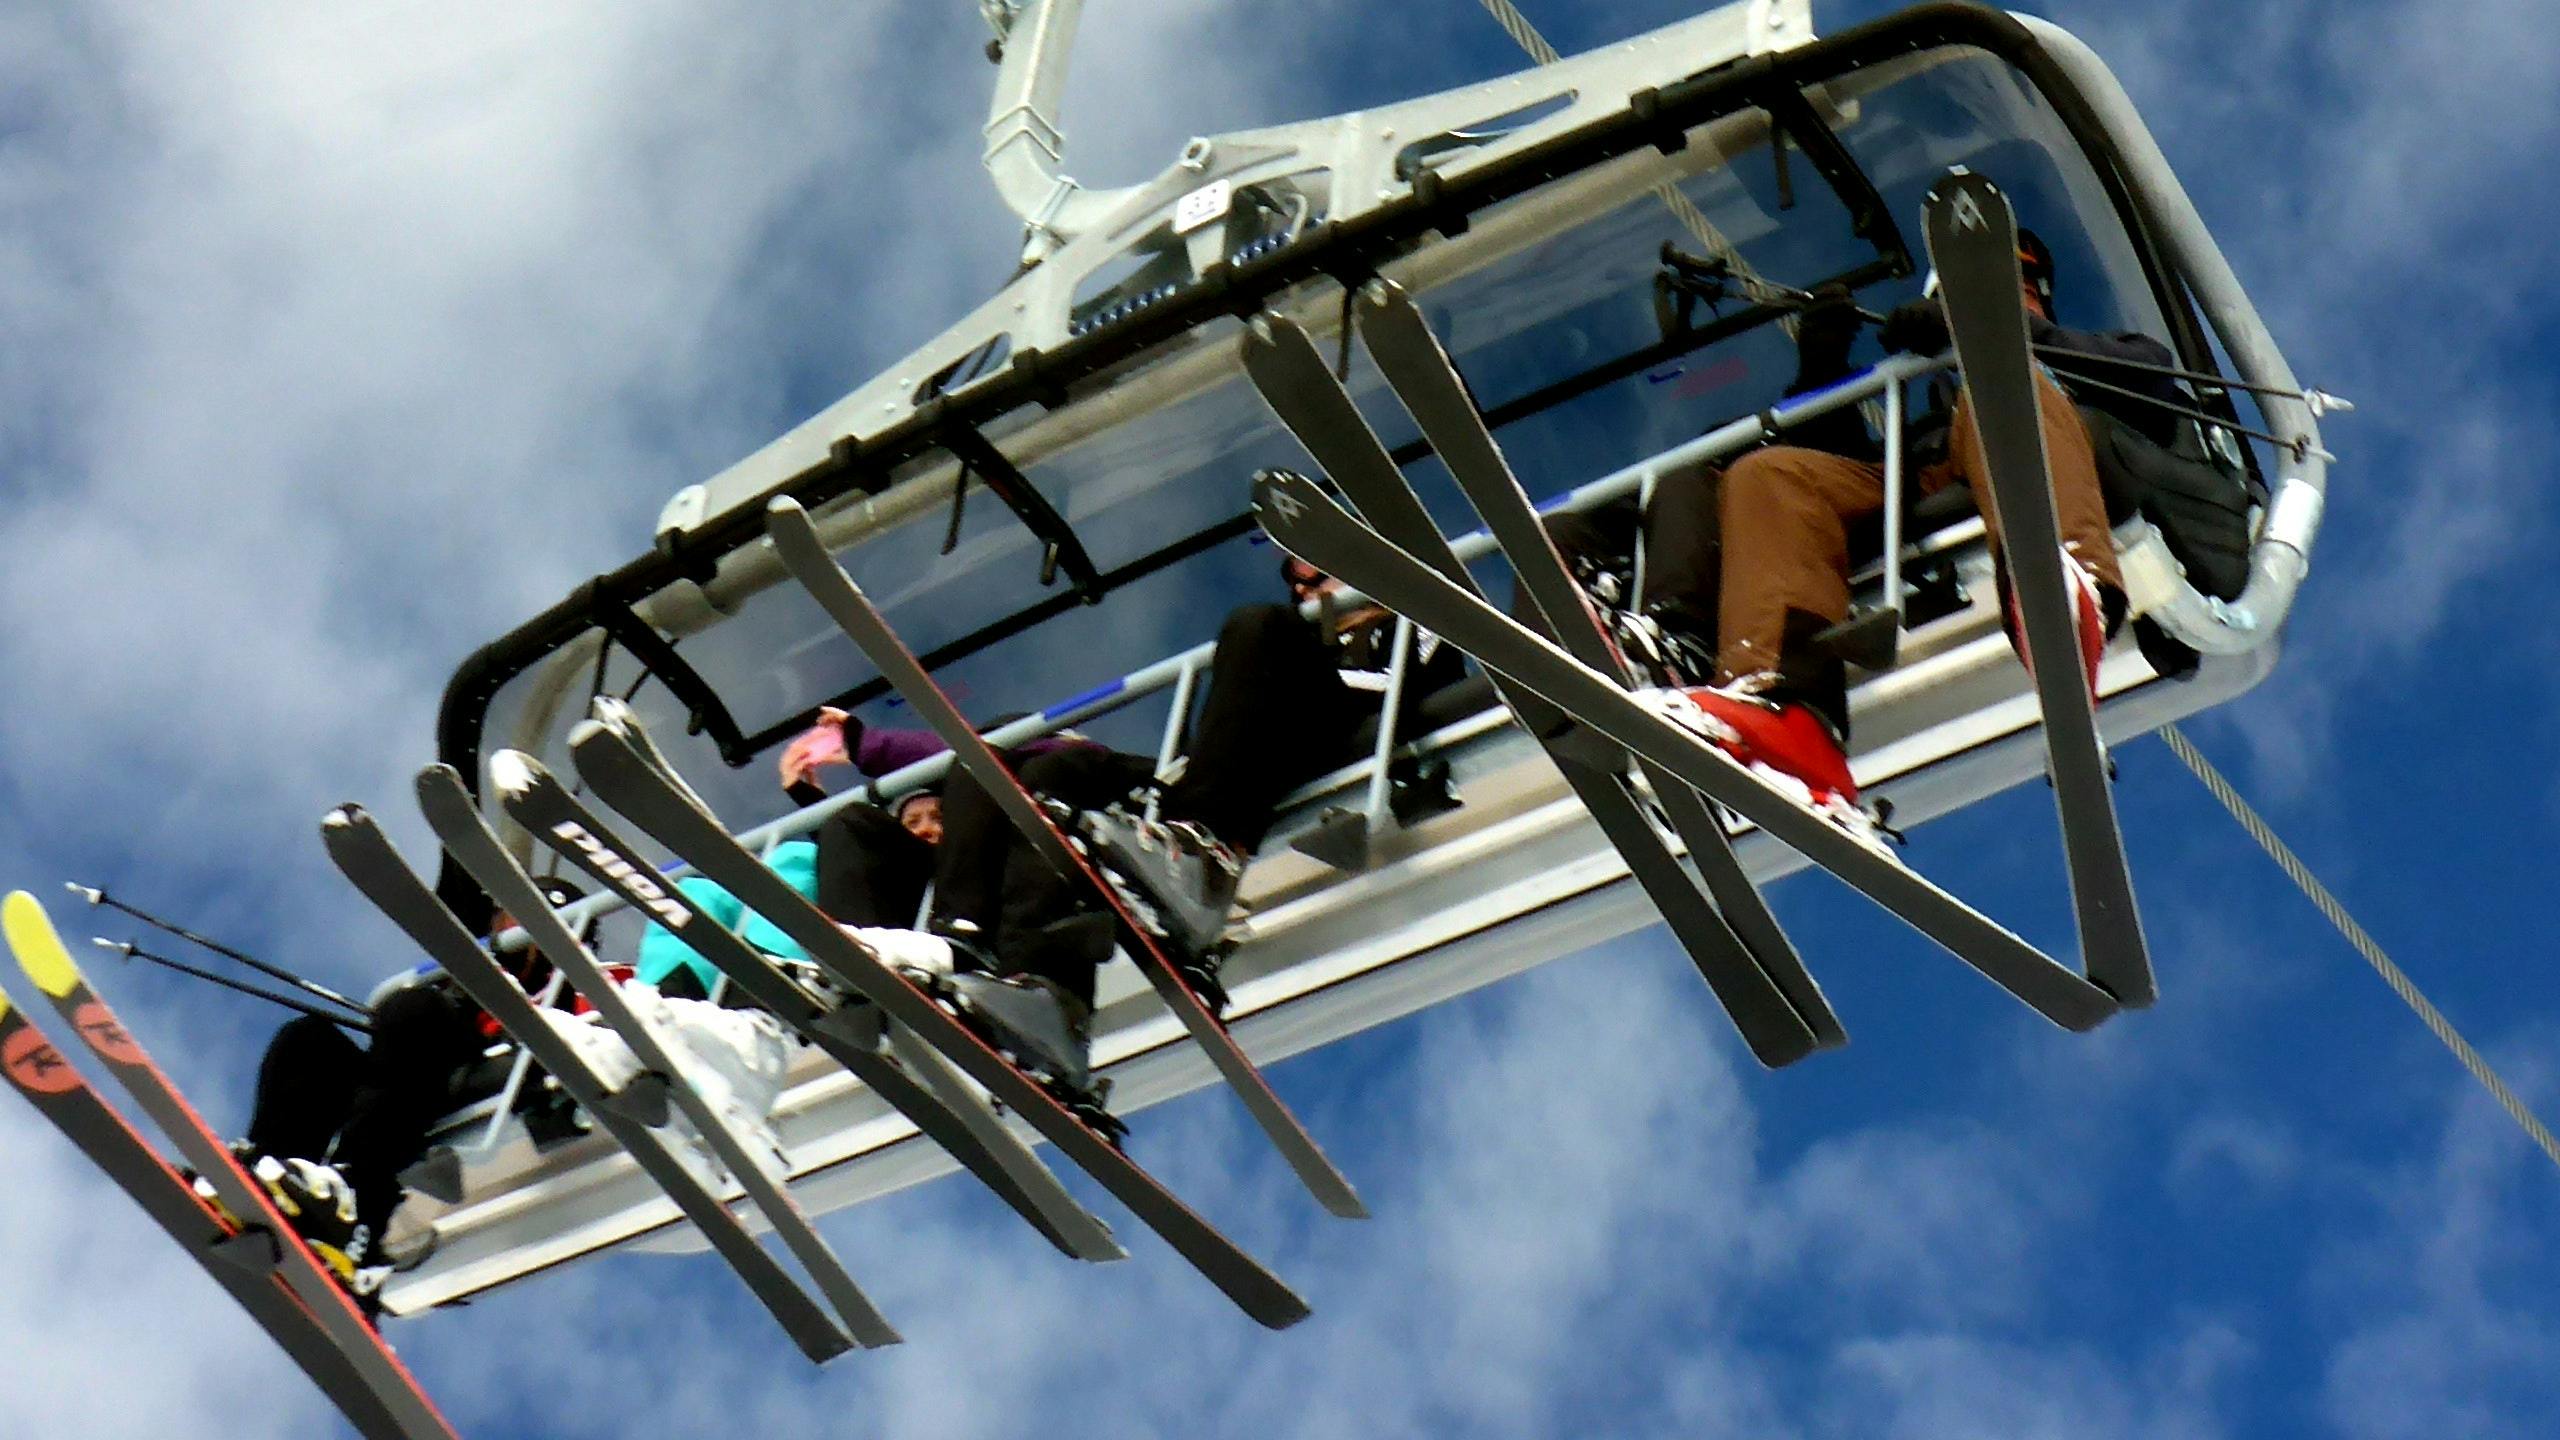 A view of skiers on a chairlift taken from below.